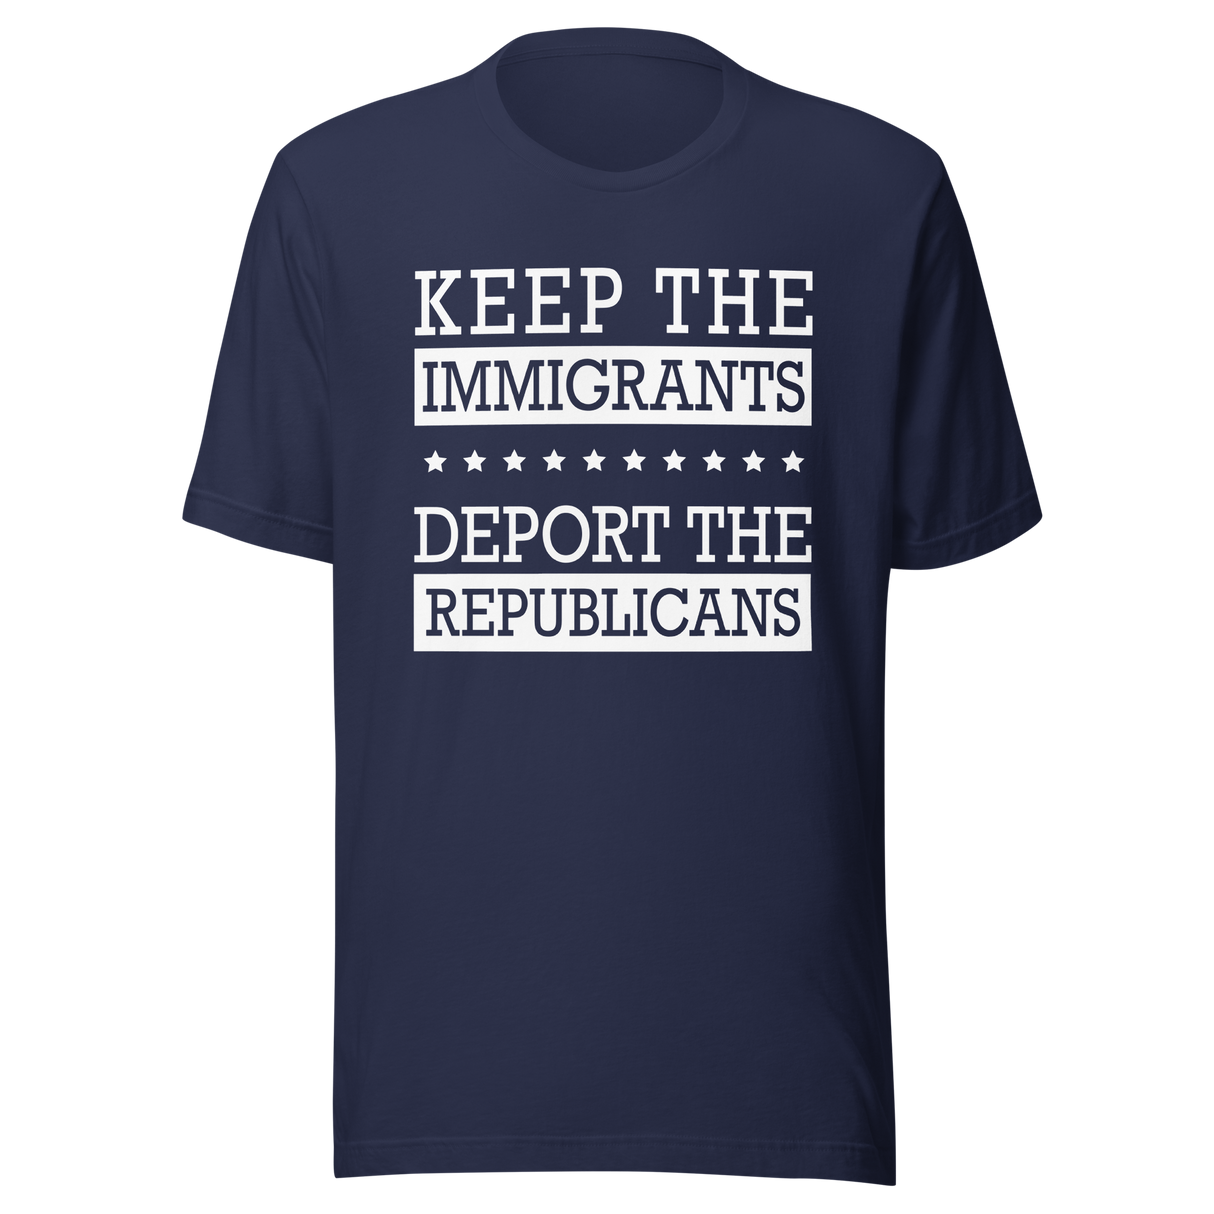 keep-the-immigrants-deport-the-republicans-usa-tee-deport-t-shirt-america-tee-t-shirt-tee#color_navy